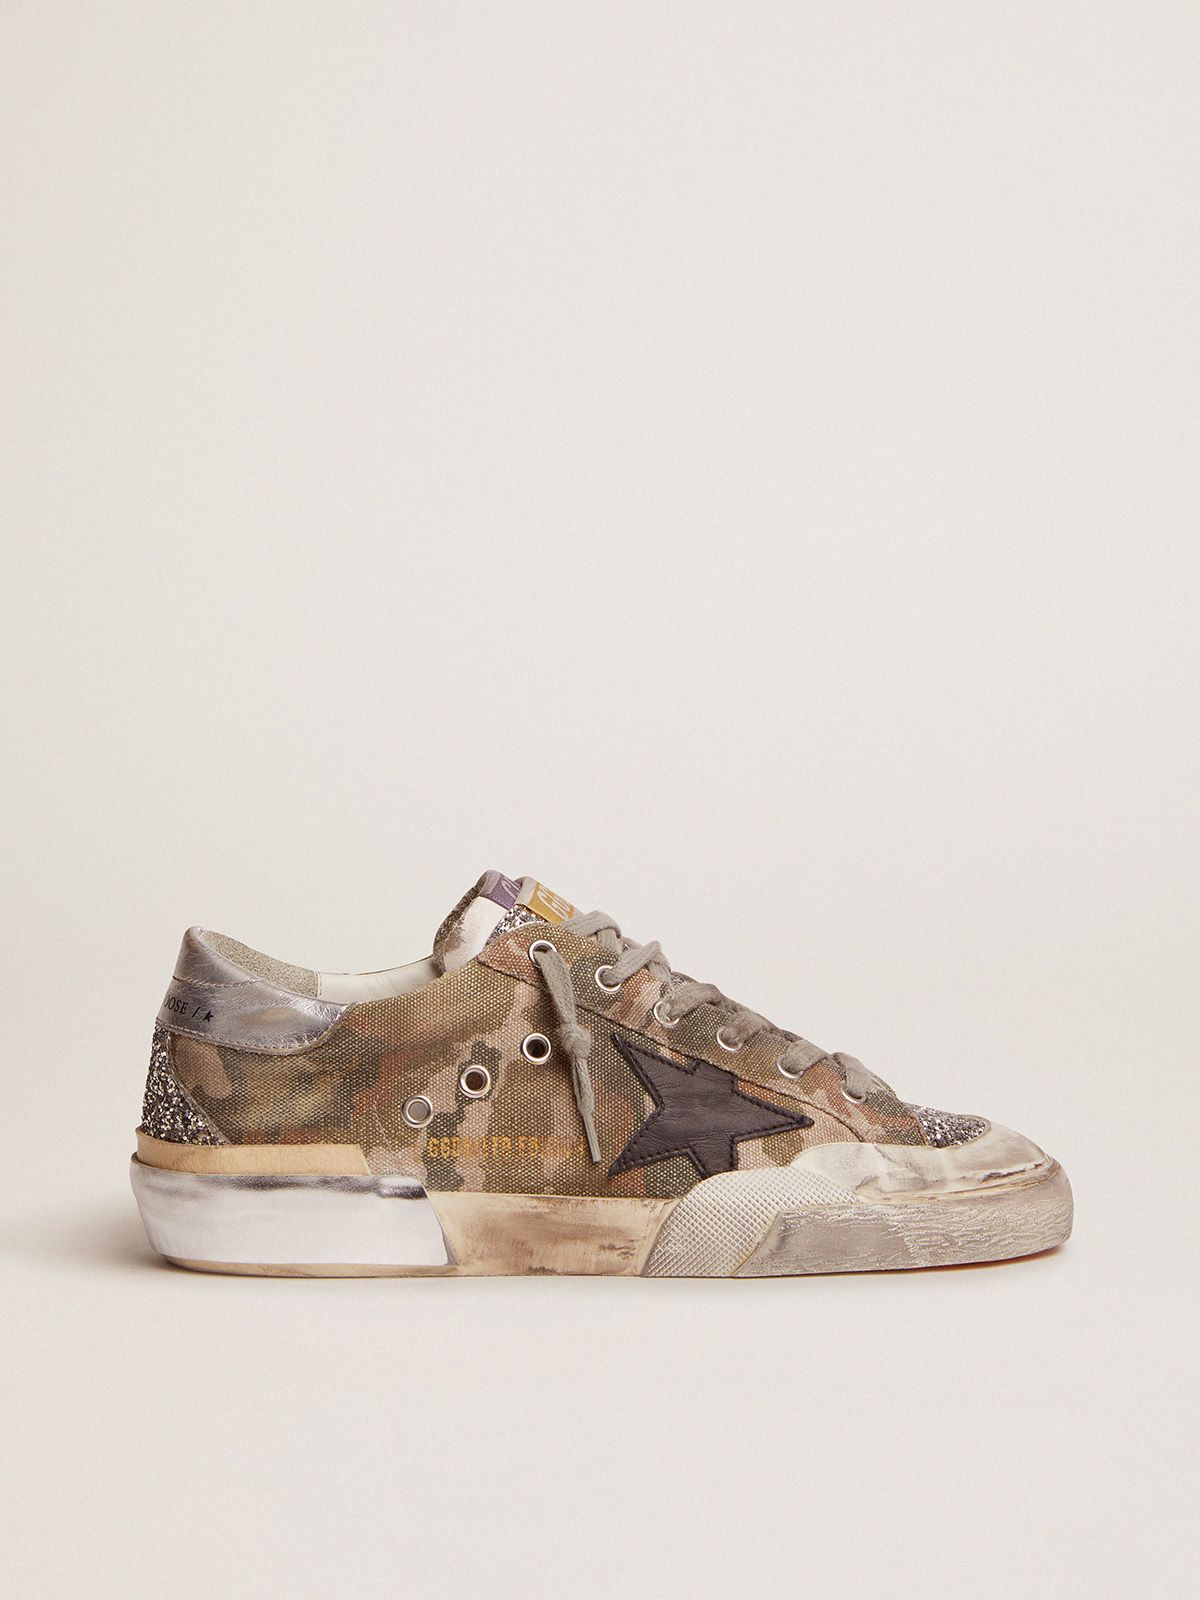 Sneakers Uomo Golden Goose Super-Star Penstar LAB sneakers in camouflage canvas with multi-foxing